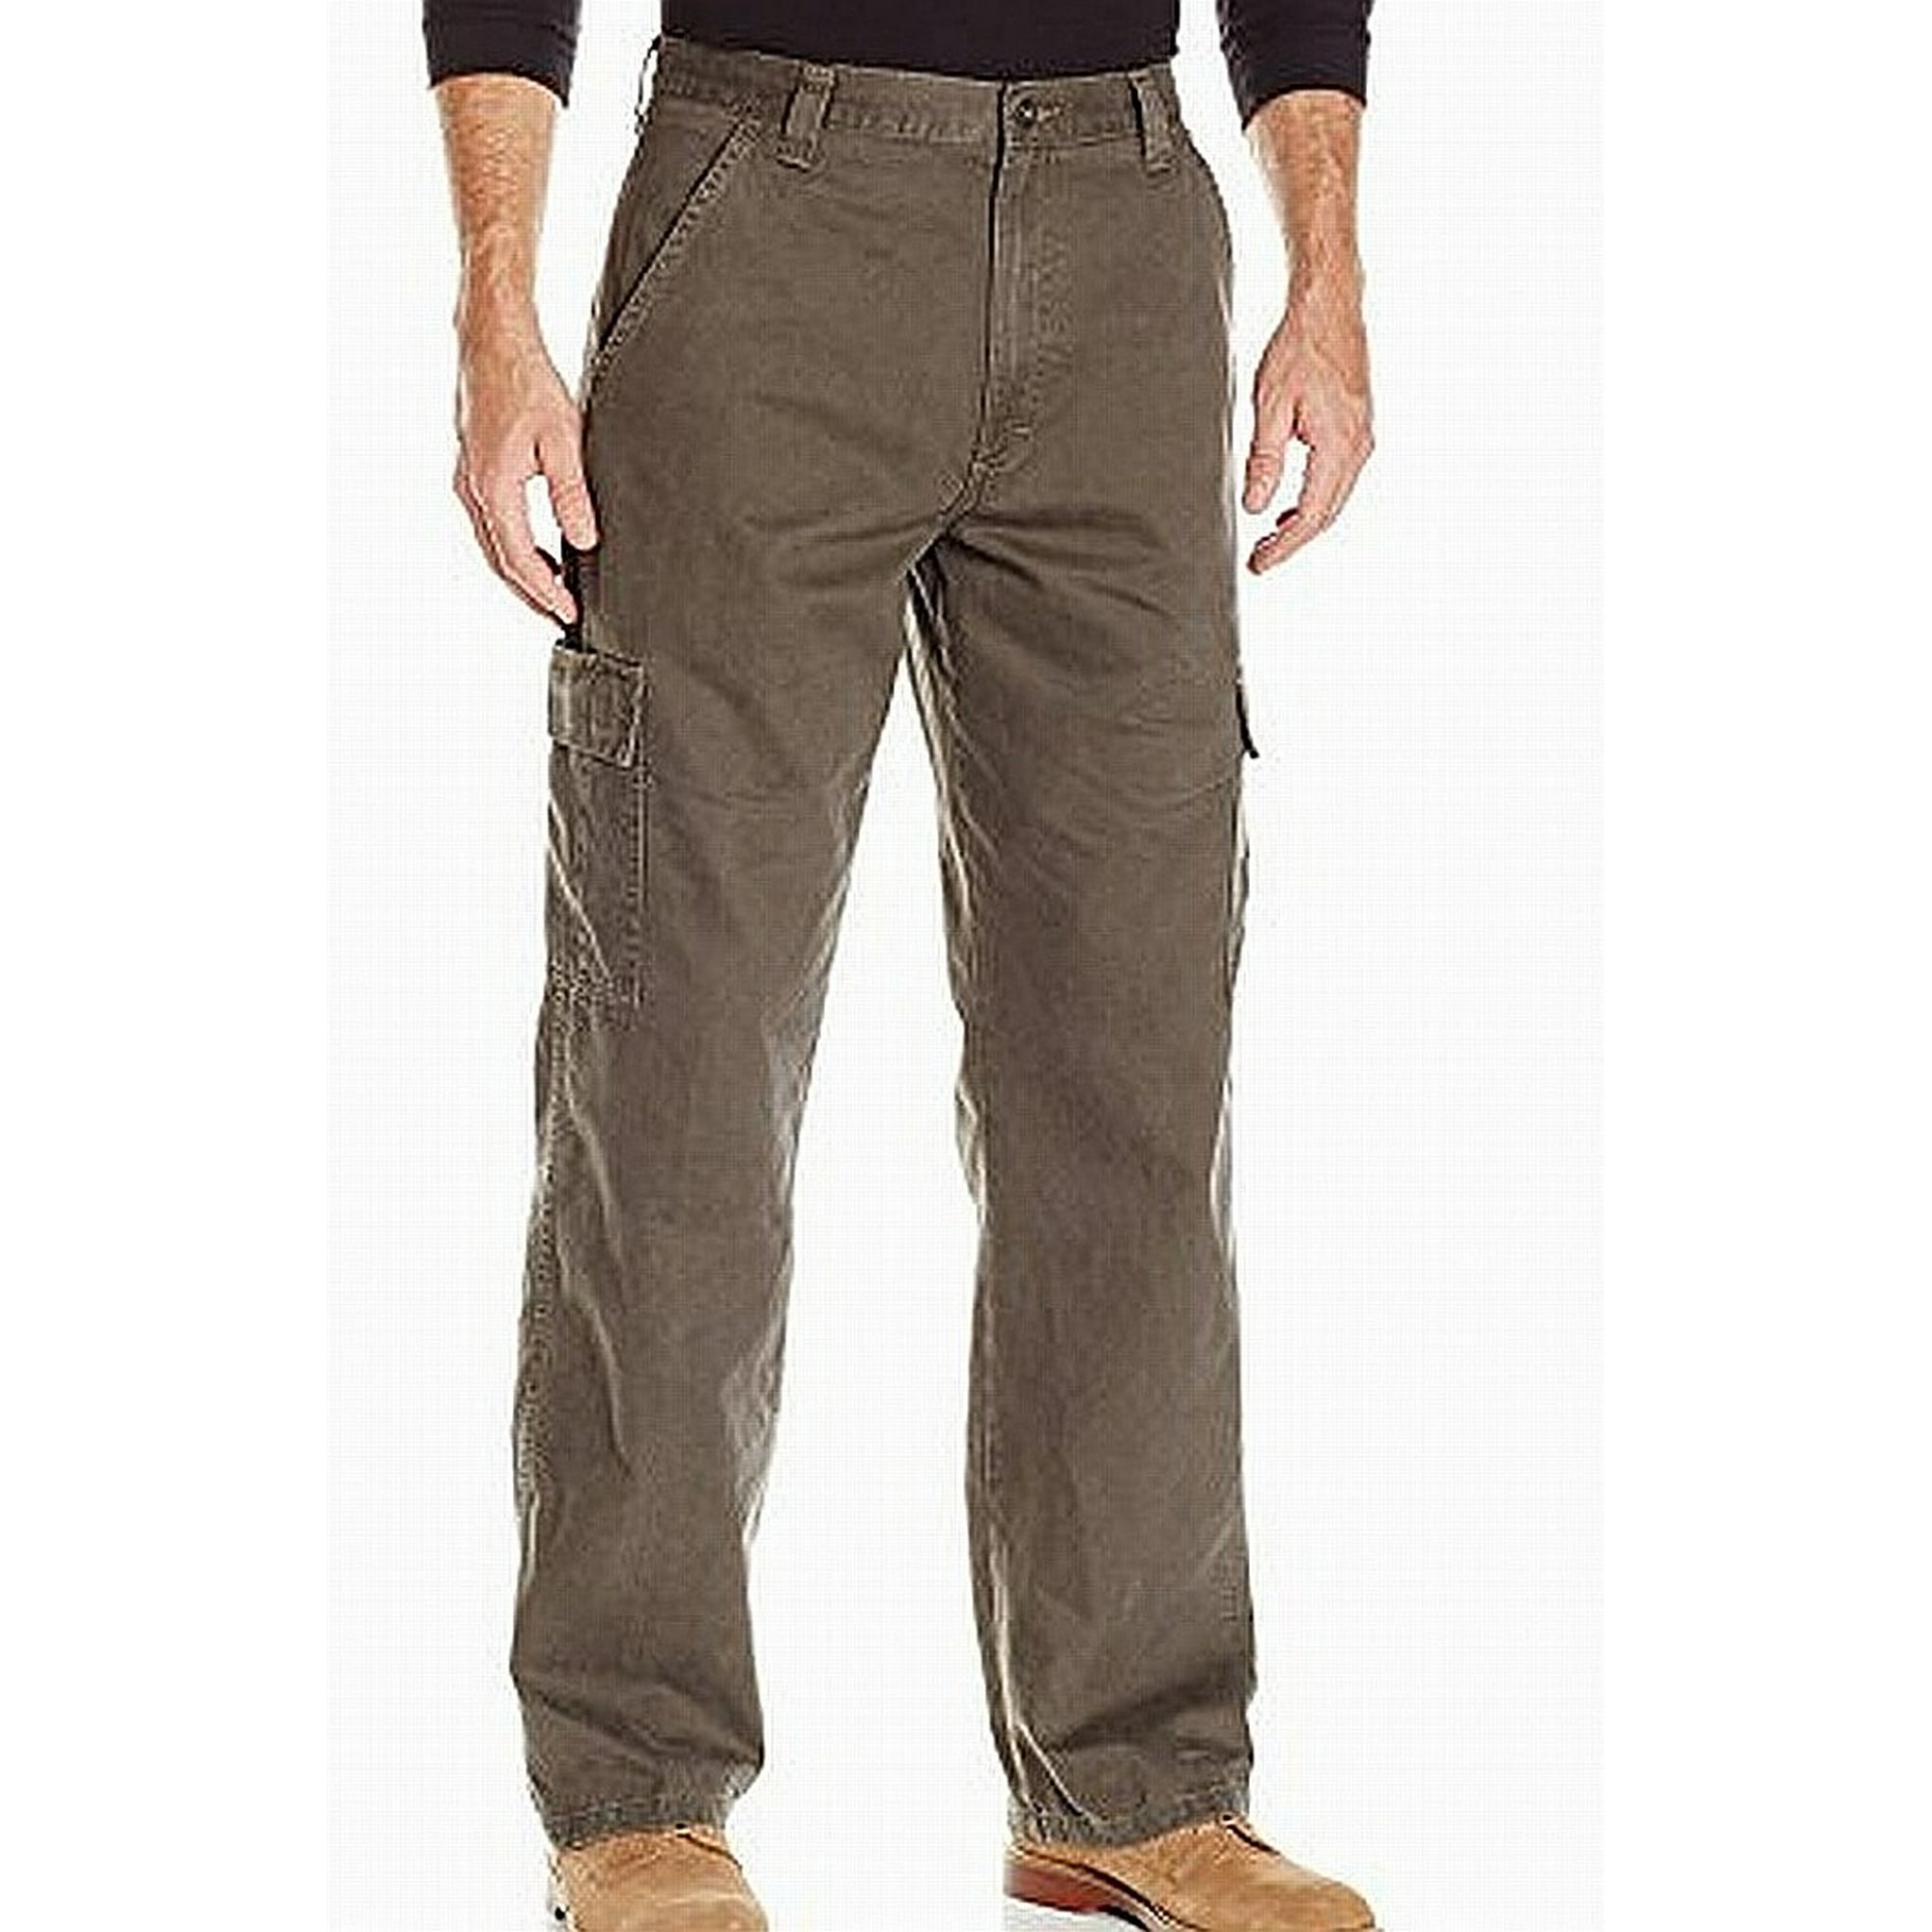 Wrangler Authentics Men's Classic Twill Relaxed Fit Cargo Pant, Olive Drab,  33W x 30L | Walmart Canada